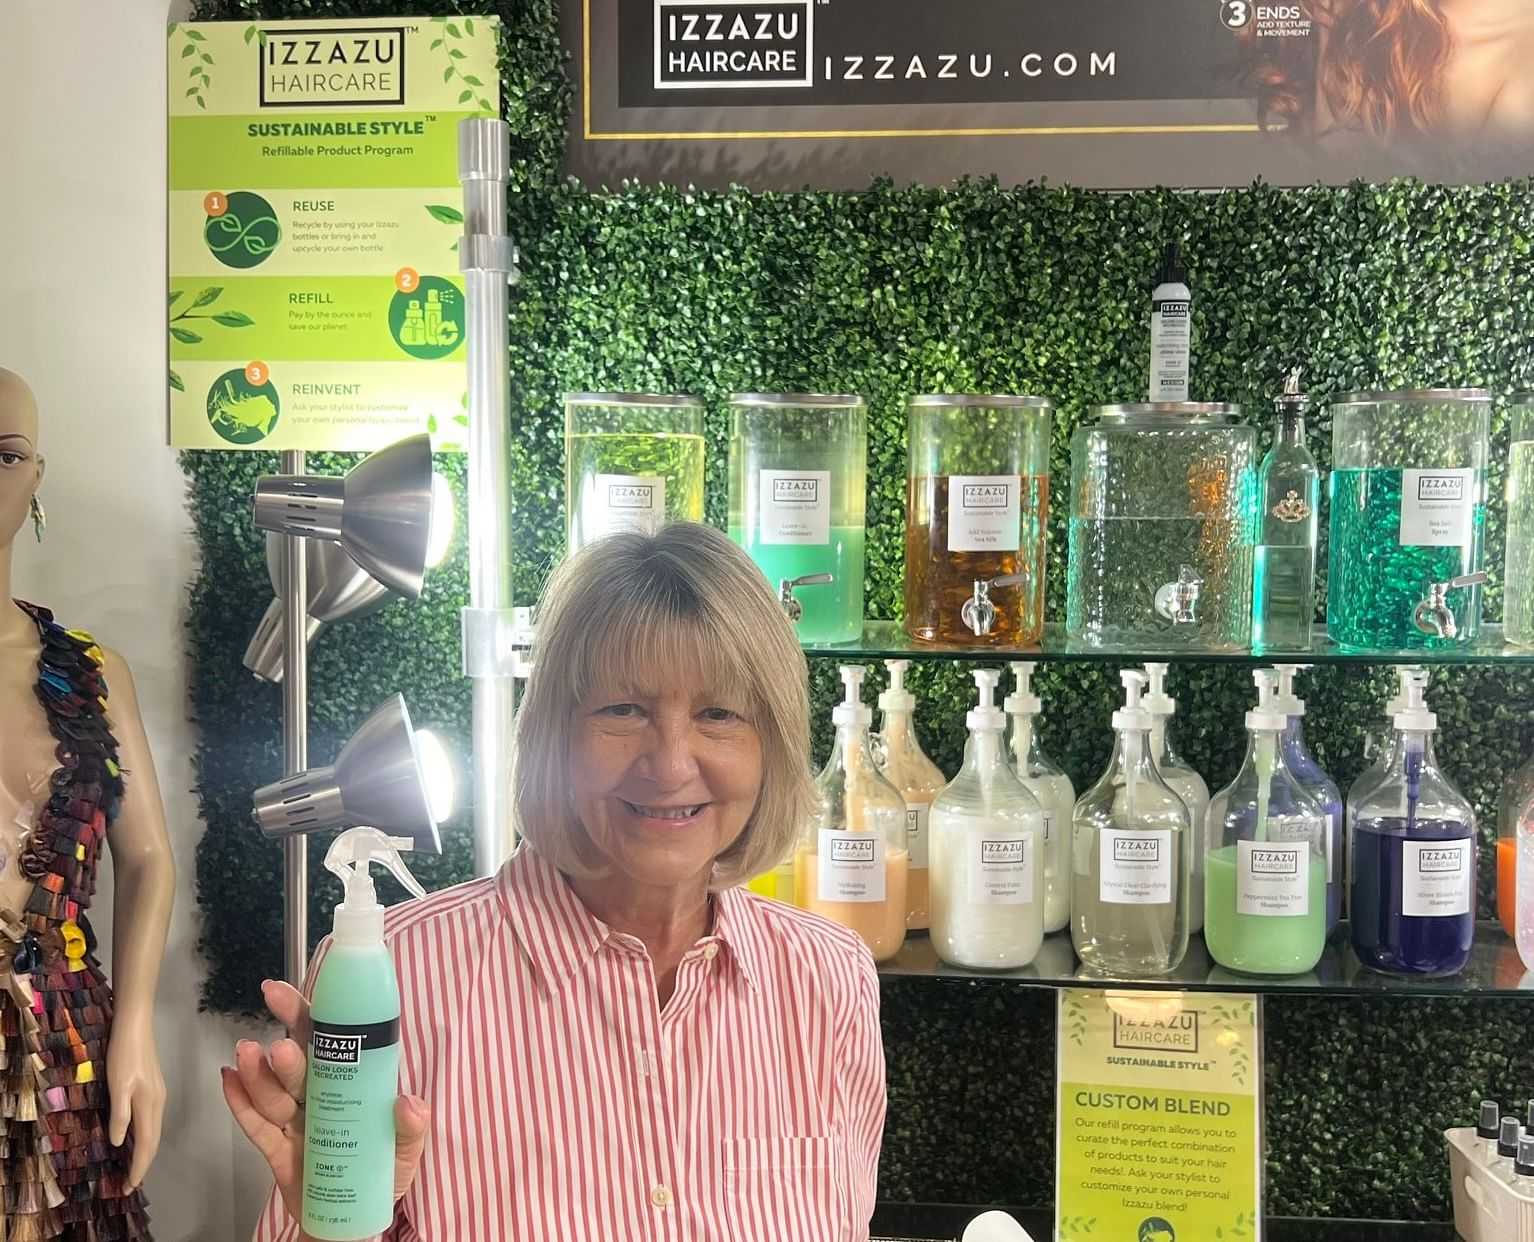 Woman holding a hair product bottle in front of a sustainable haircare display.